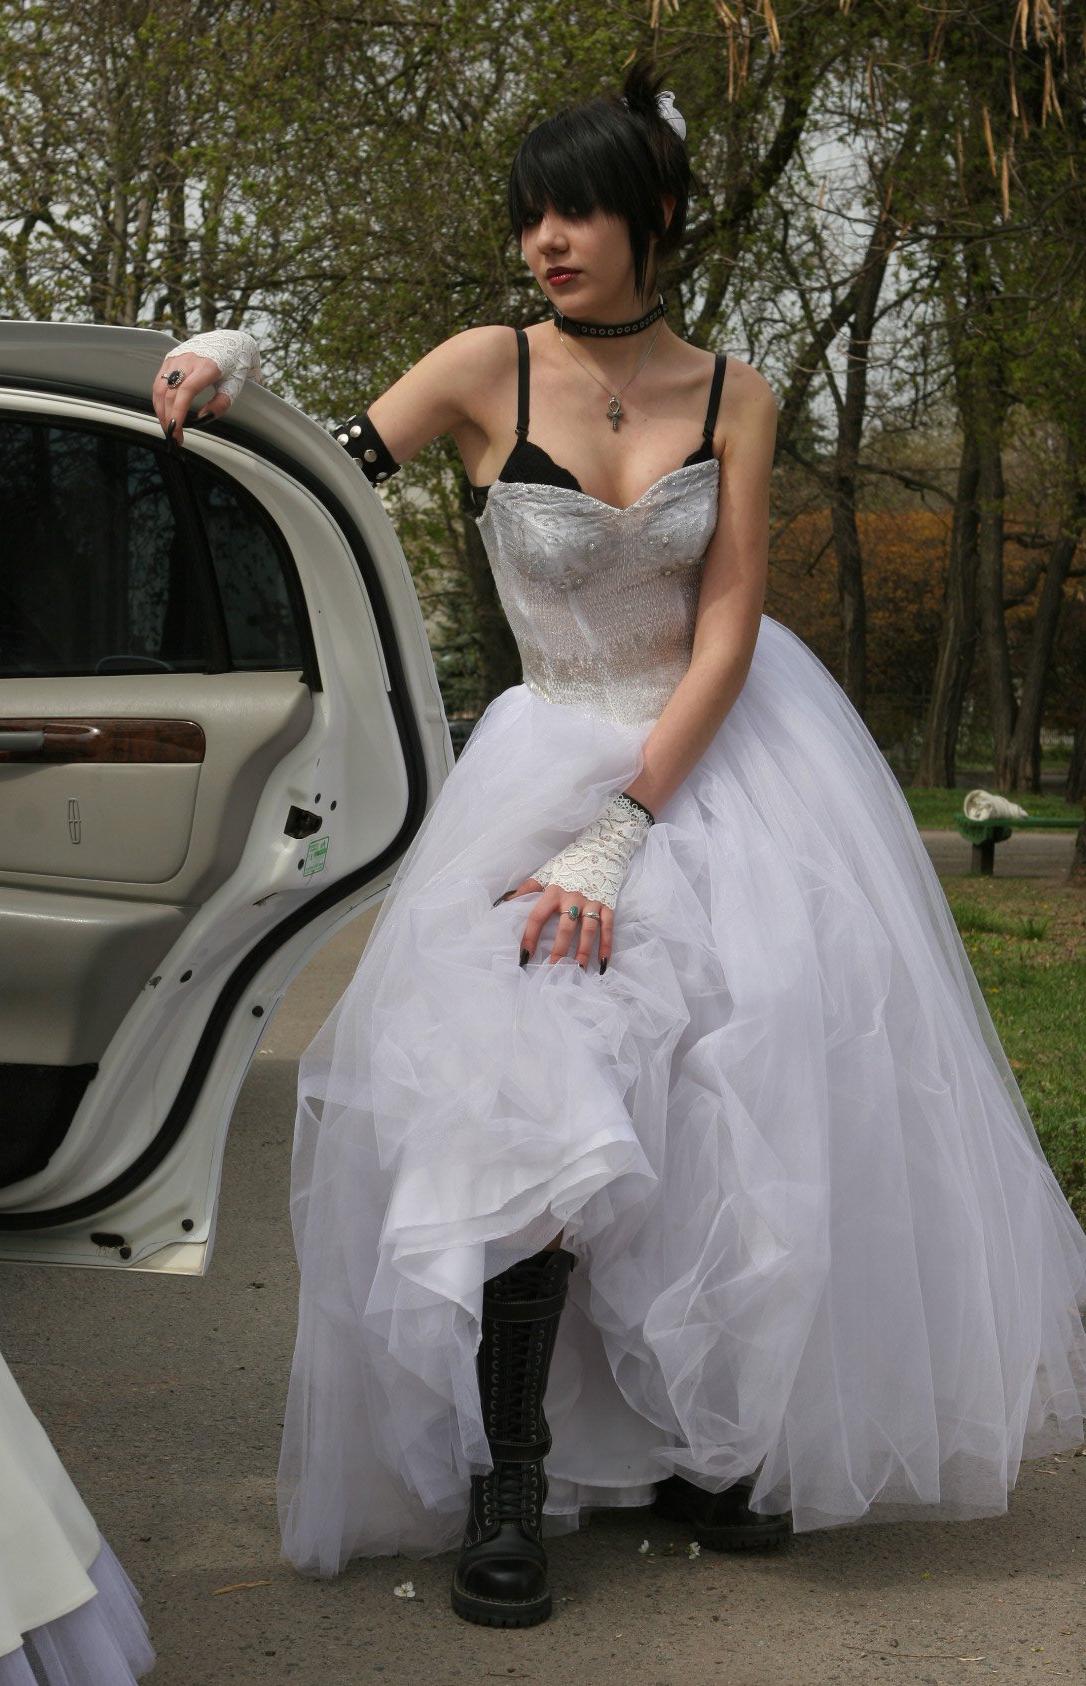 Brunette Gothic Bride wearing Black Sheer Pantyhose and White Long Tulle Dress